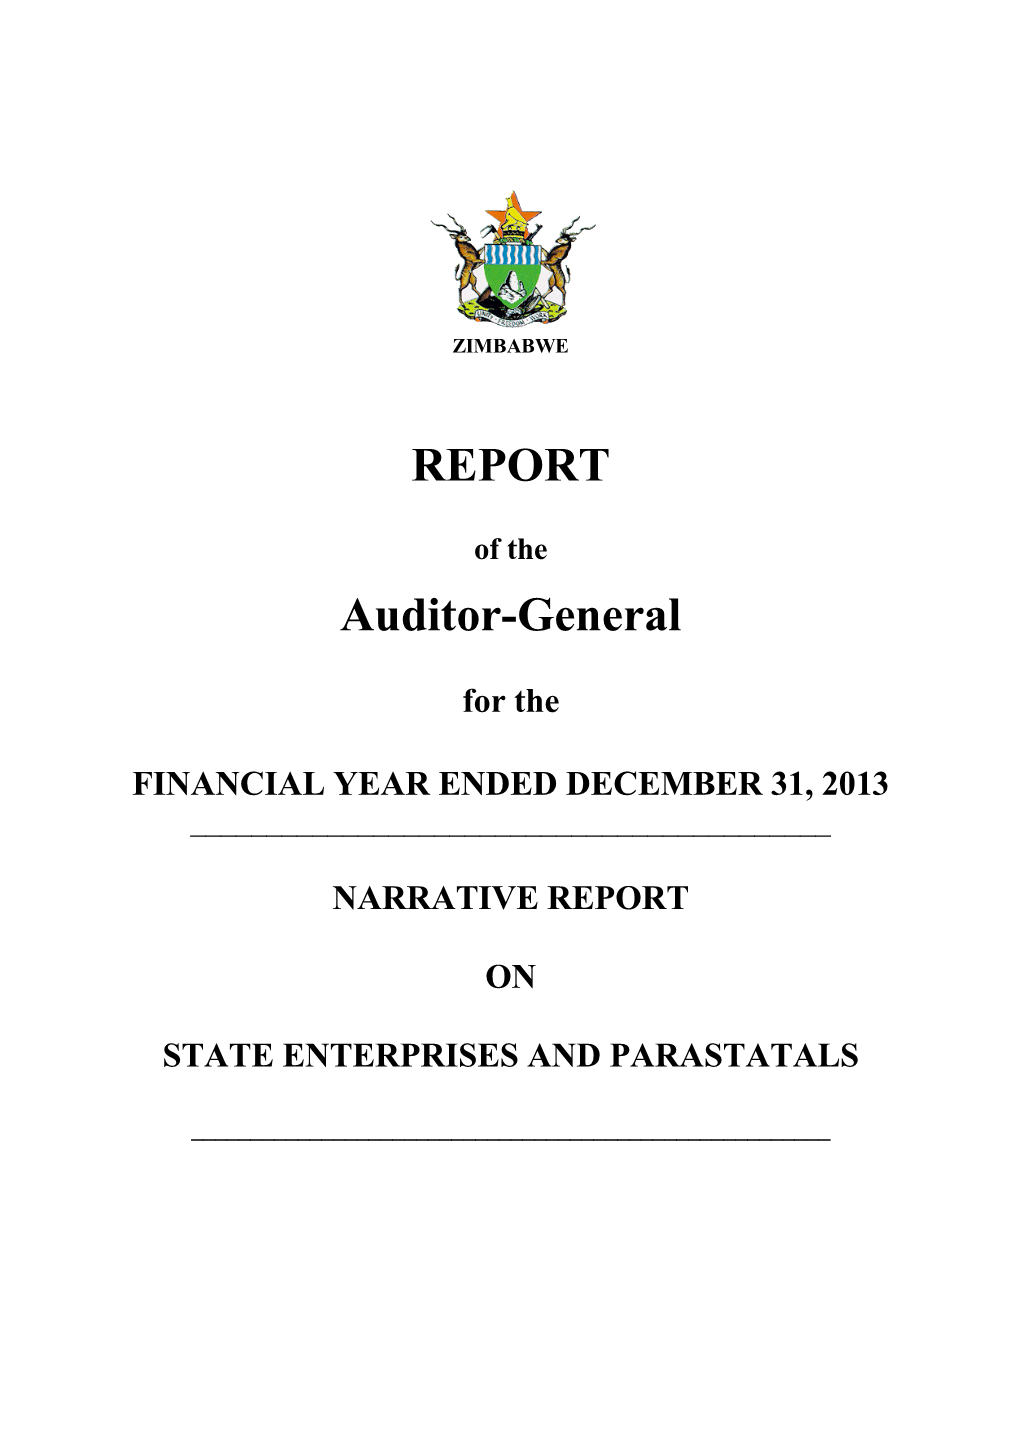 Narrative Report on State Enterprises and Parastatals 2013